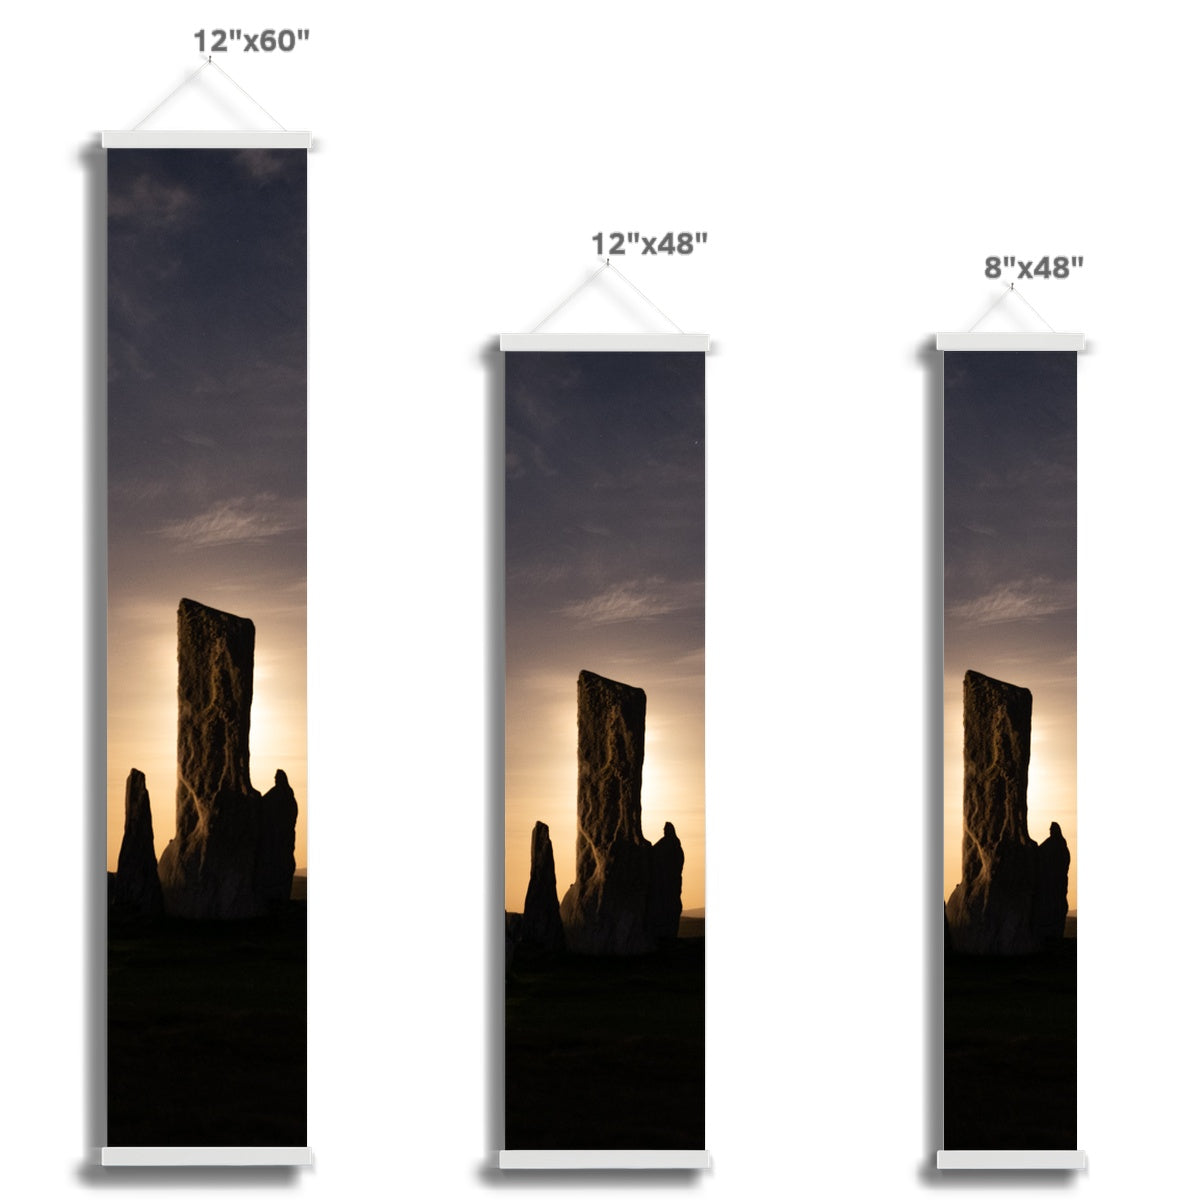 Callanish, Full Moon and Clouds Wall Height Chart